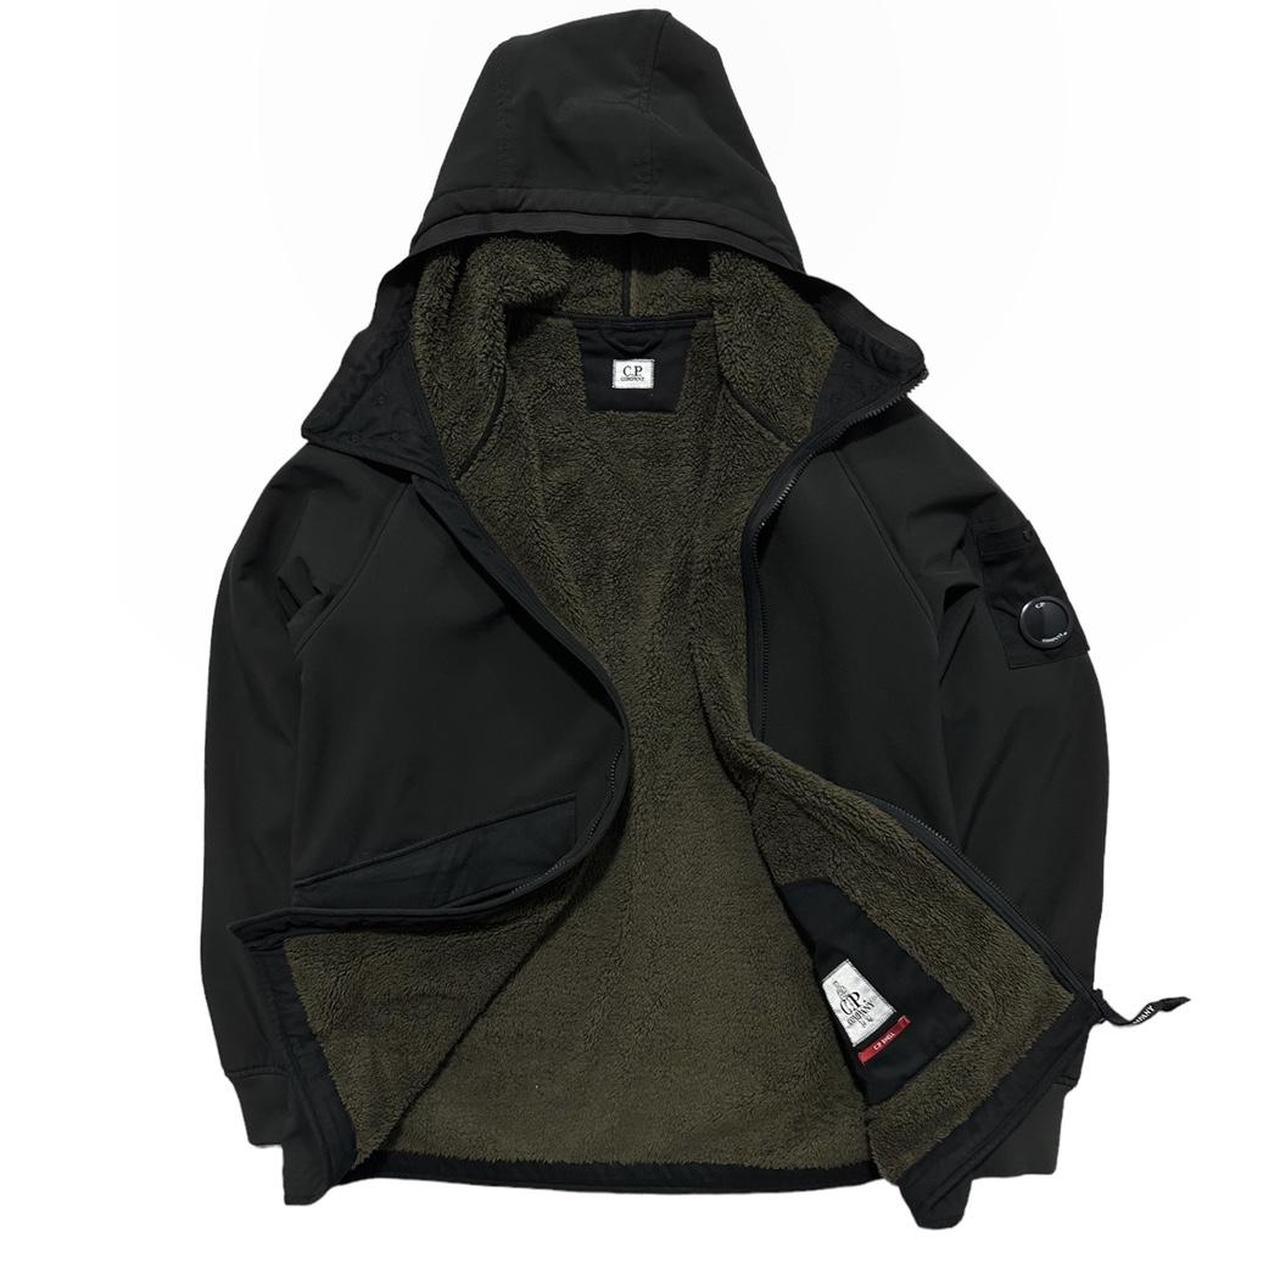 CP Company Shell Jacket - Known Source